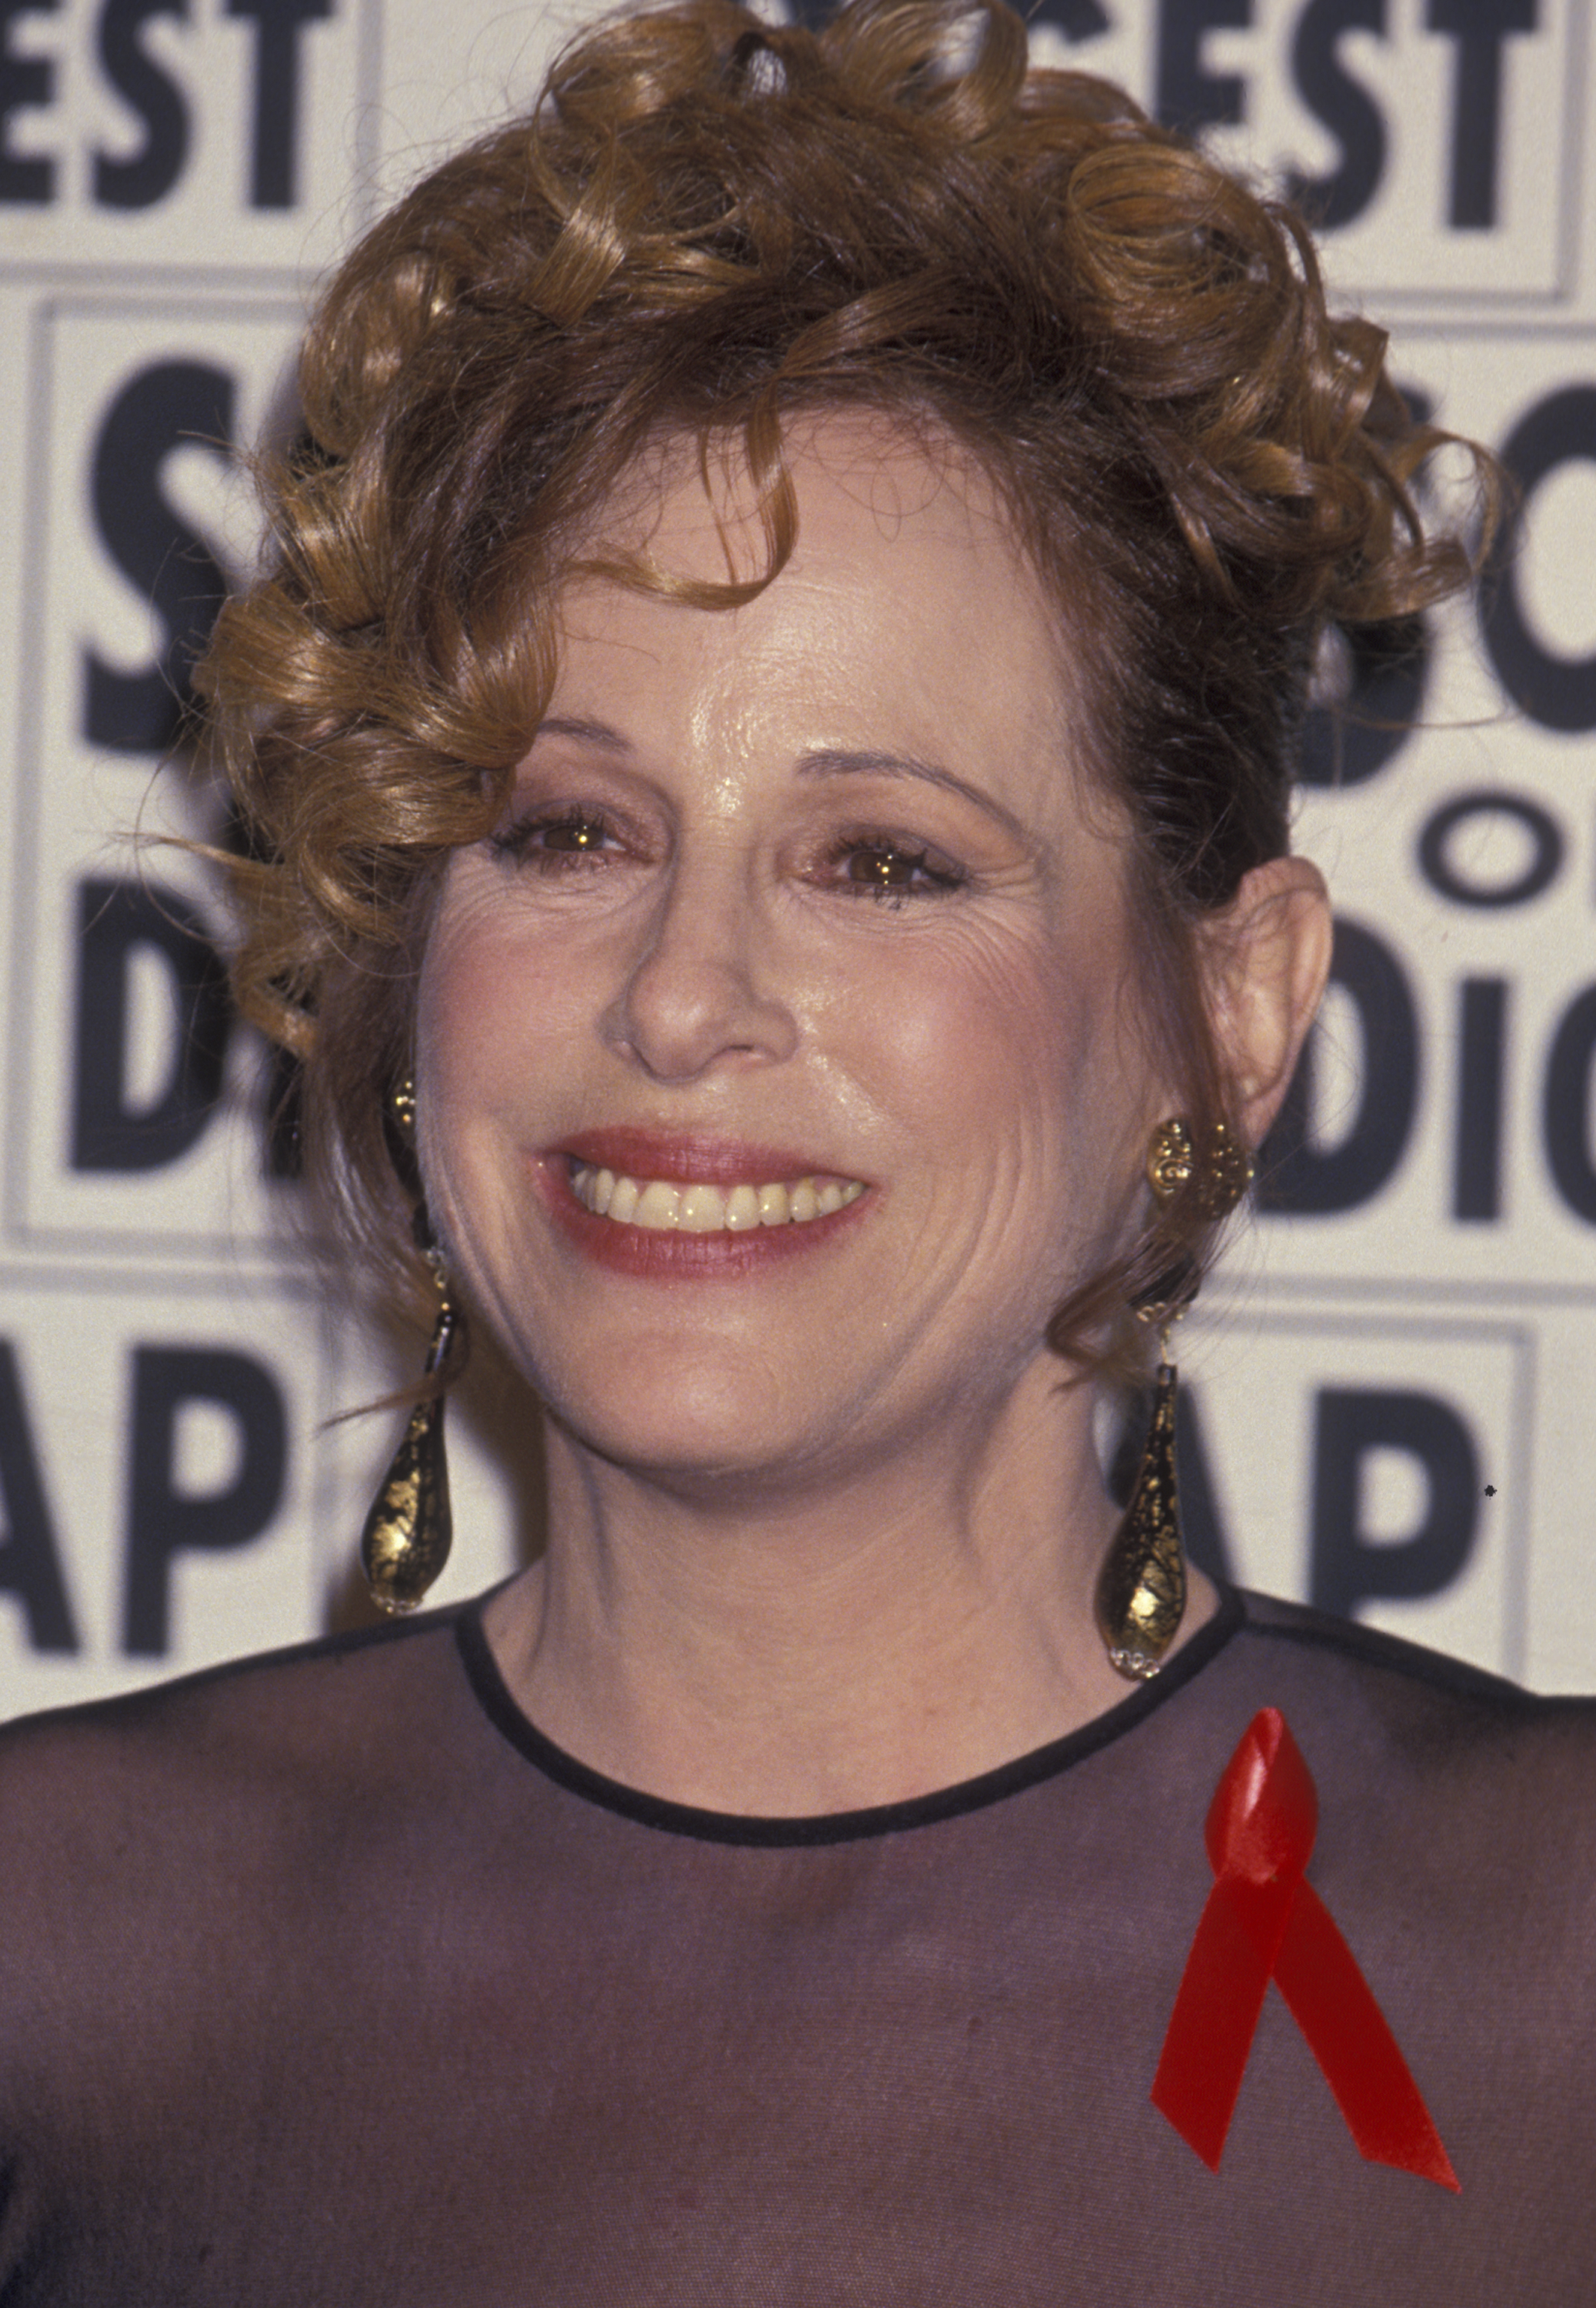 Louise Sorel attends 10th Annual Soap Opera Digest Awards in Beverly Hills, California, on February 4, 1994. | Source: Getty Images